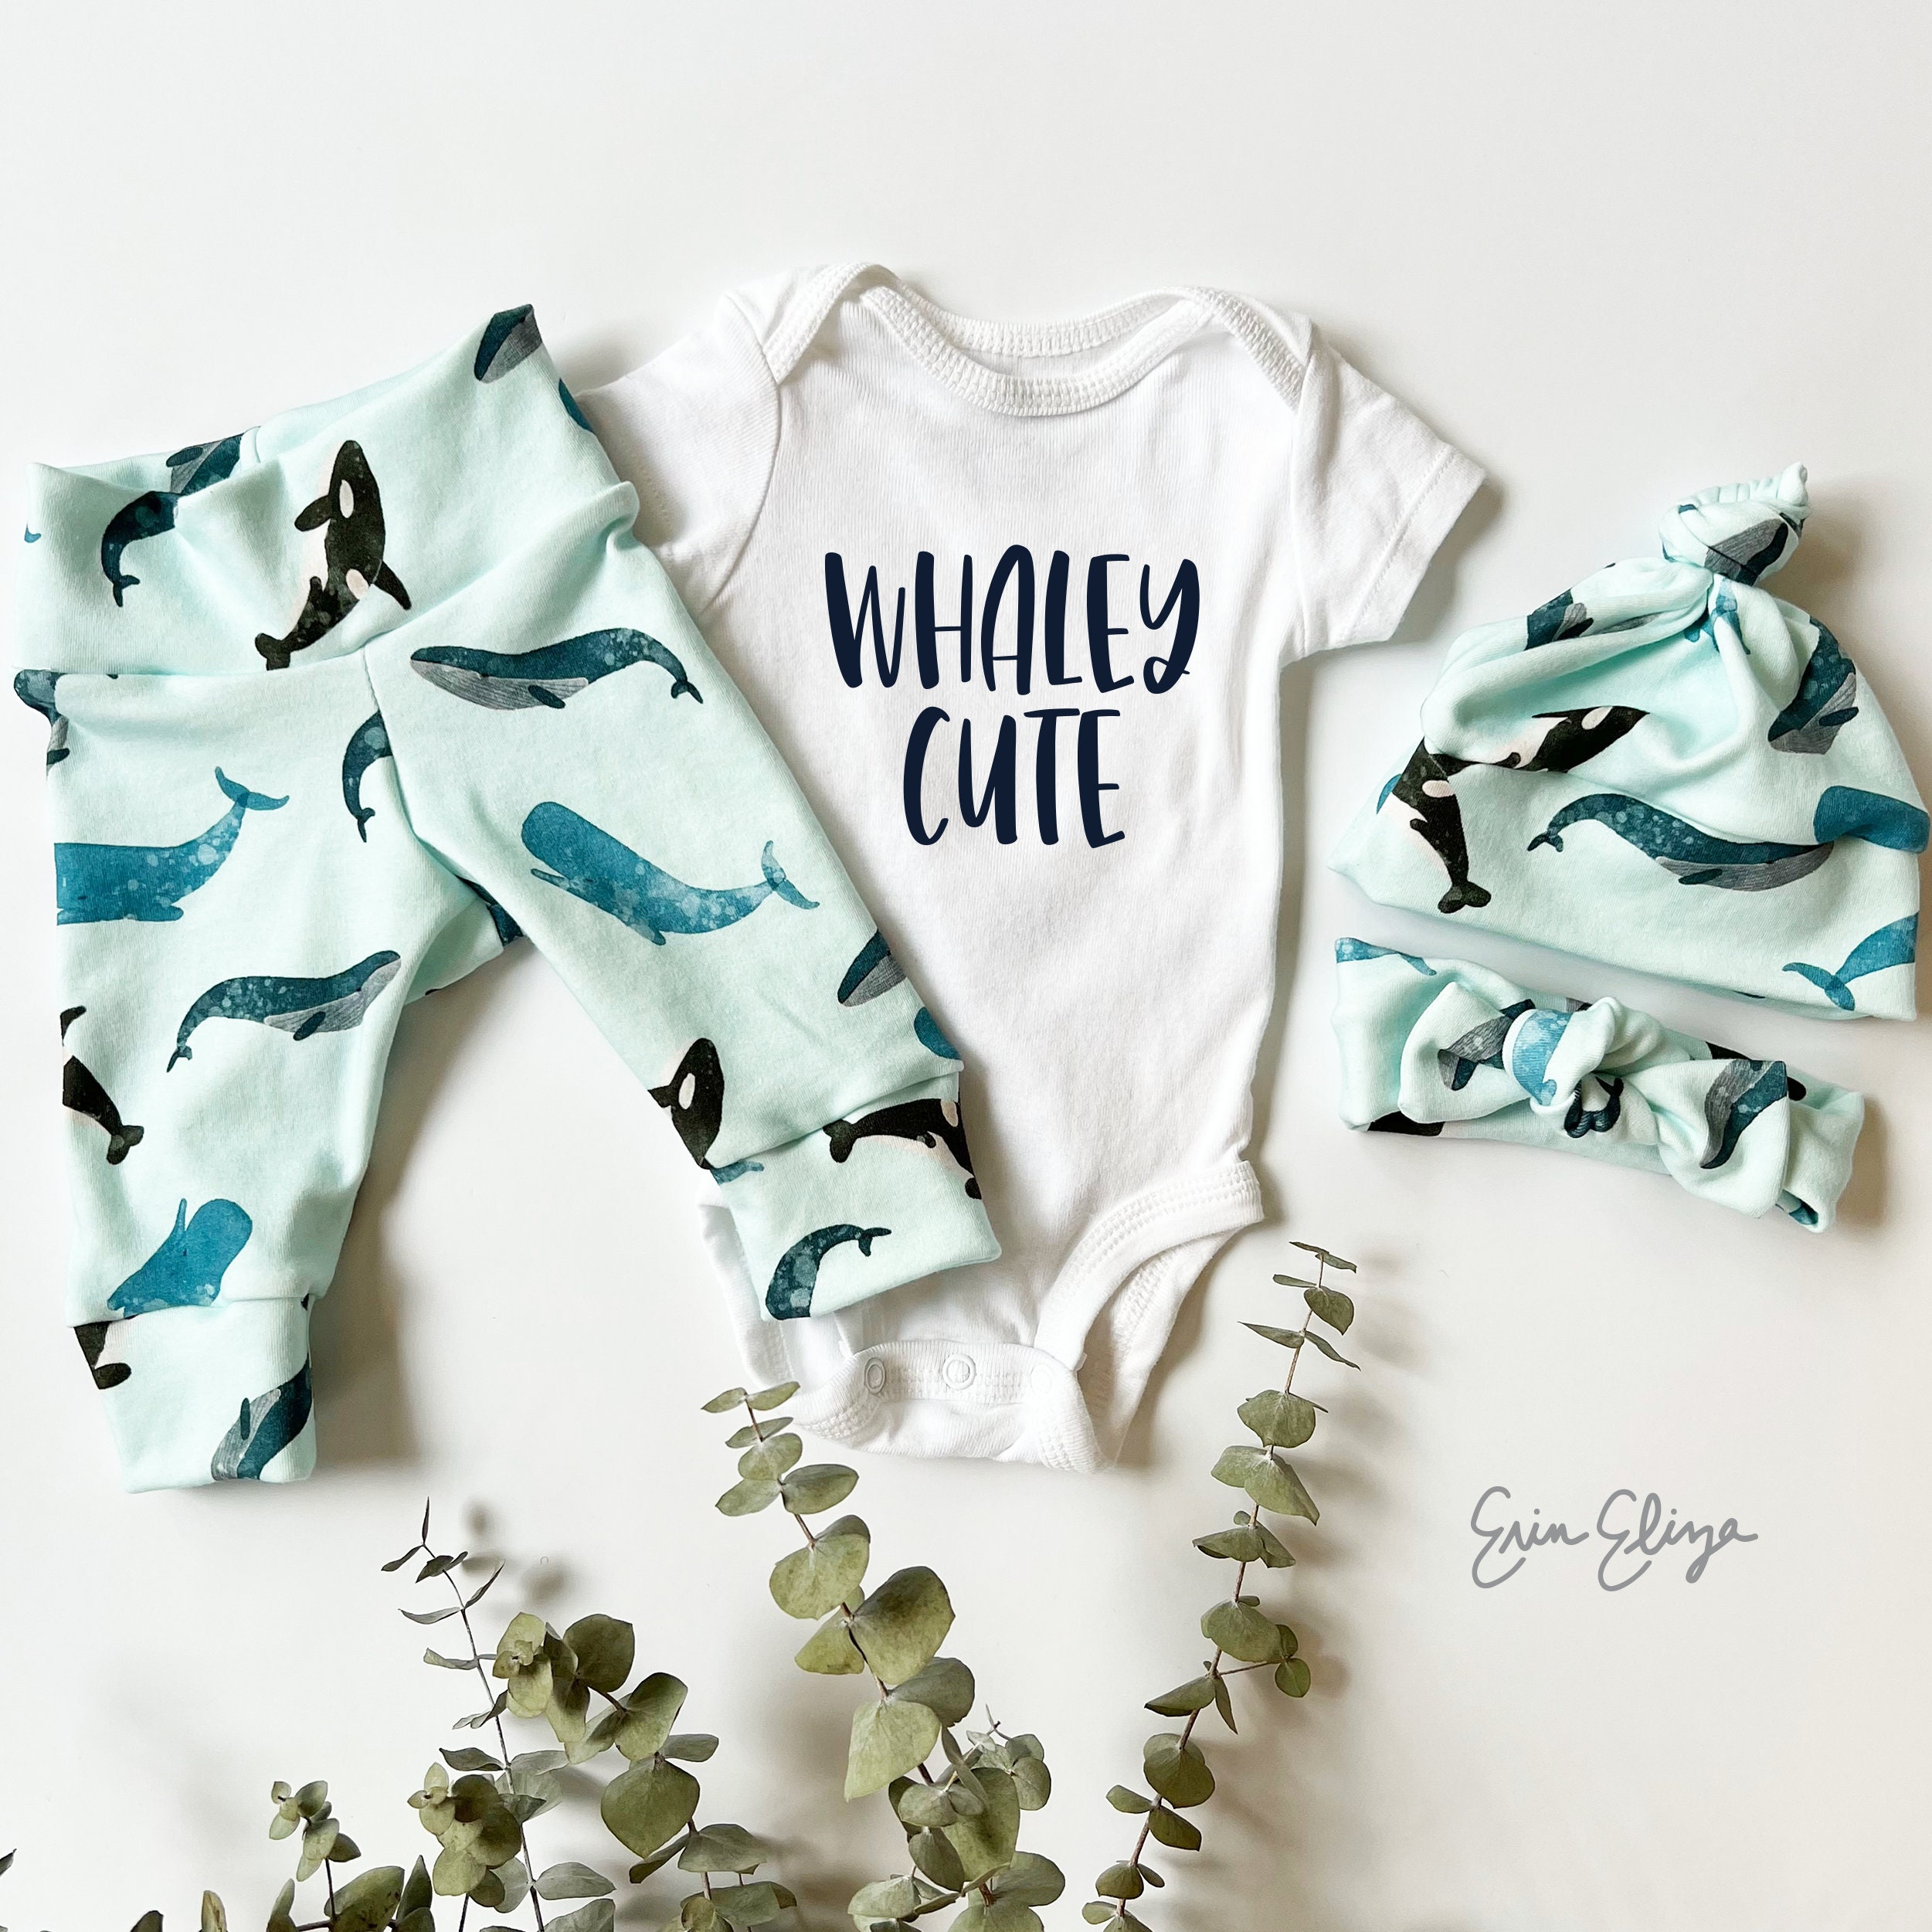 Our Green House Ocean Themed Baby Gifts - Reach for The Stars - Unisex Gift That Gives Back - Organic, Eco-Friendly & Gender Neutral - Newborn Boy or Girl | Our Green